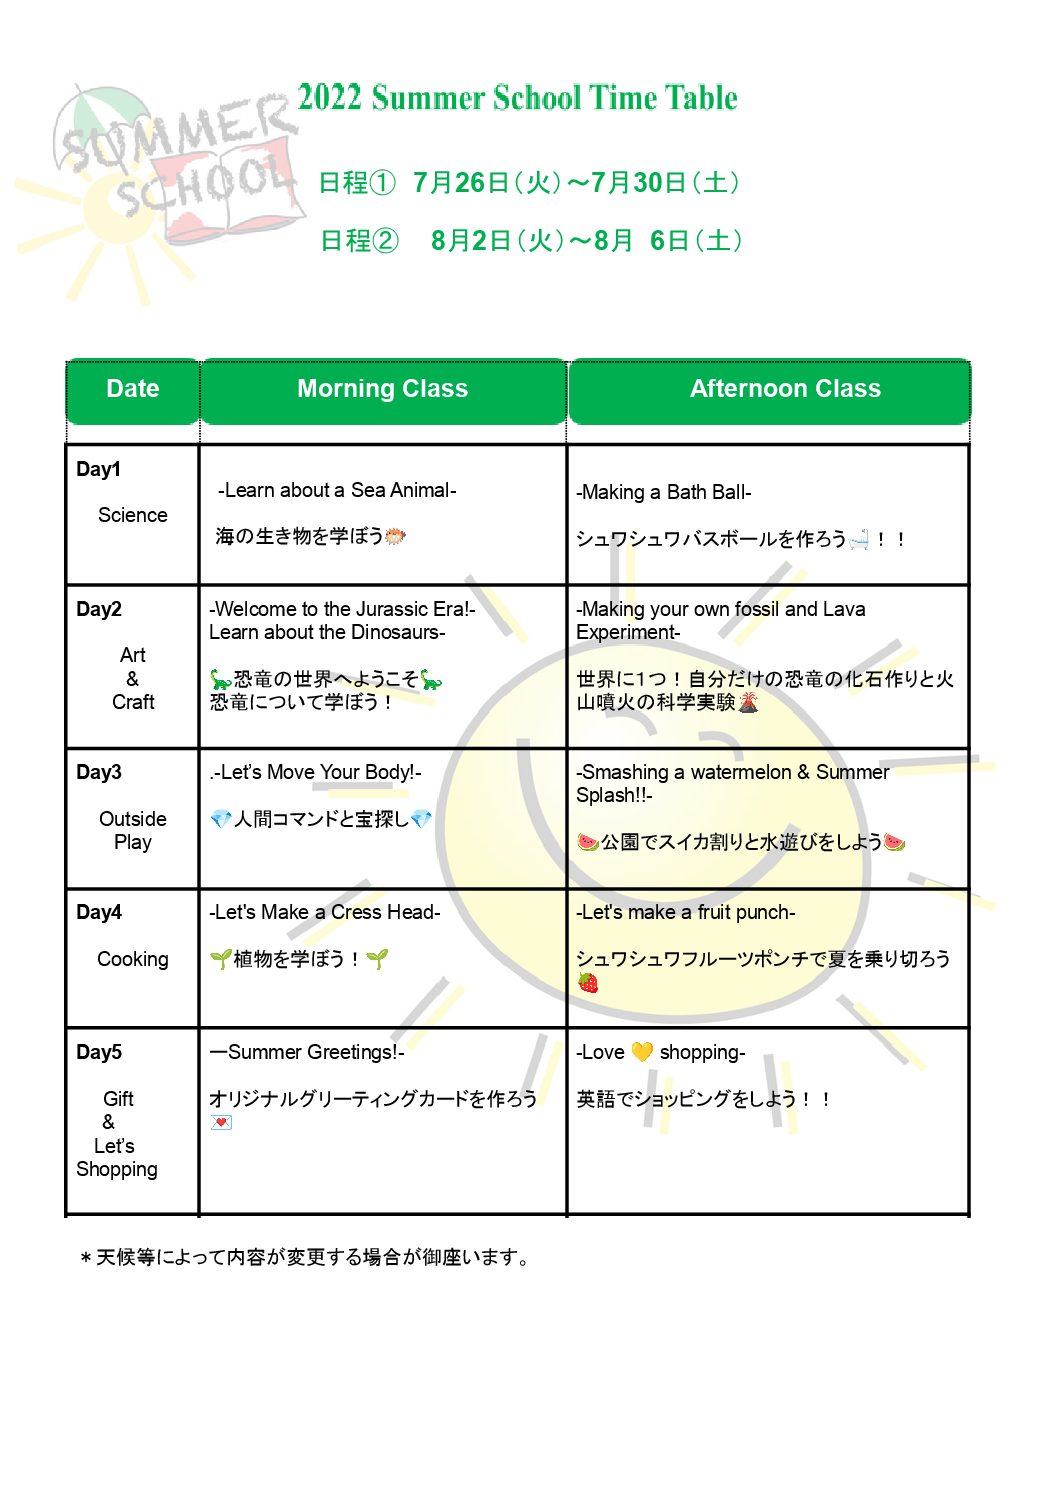 Summer Camp 2022 time table PDF